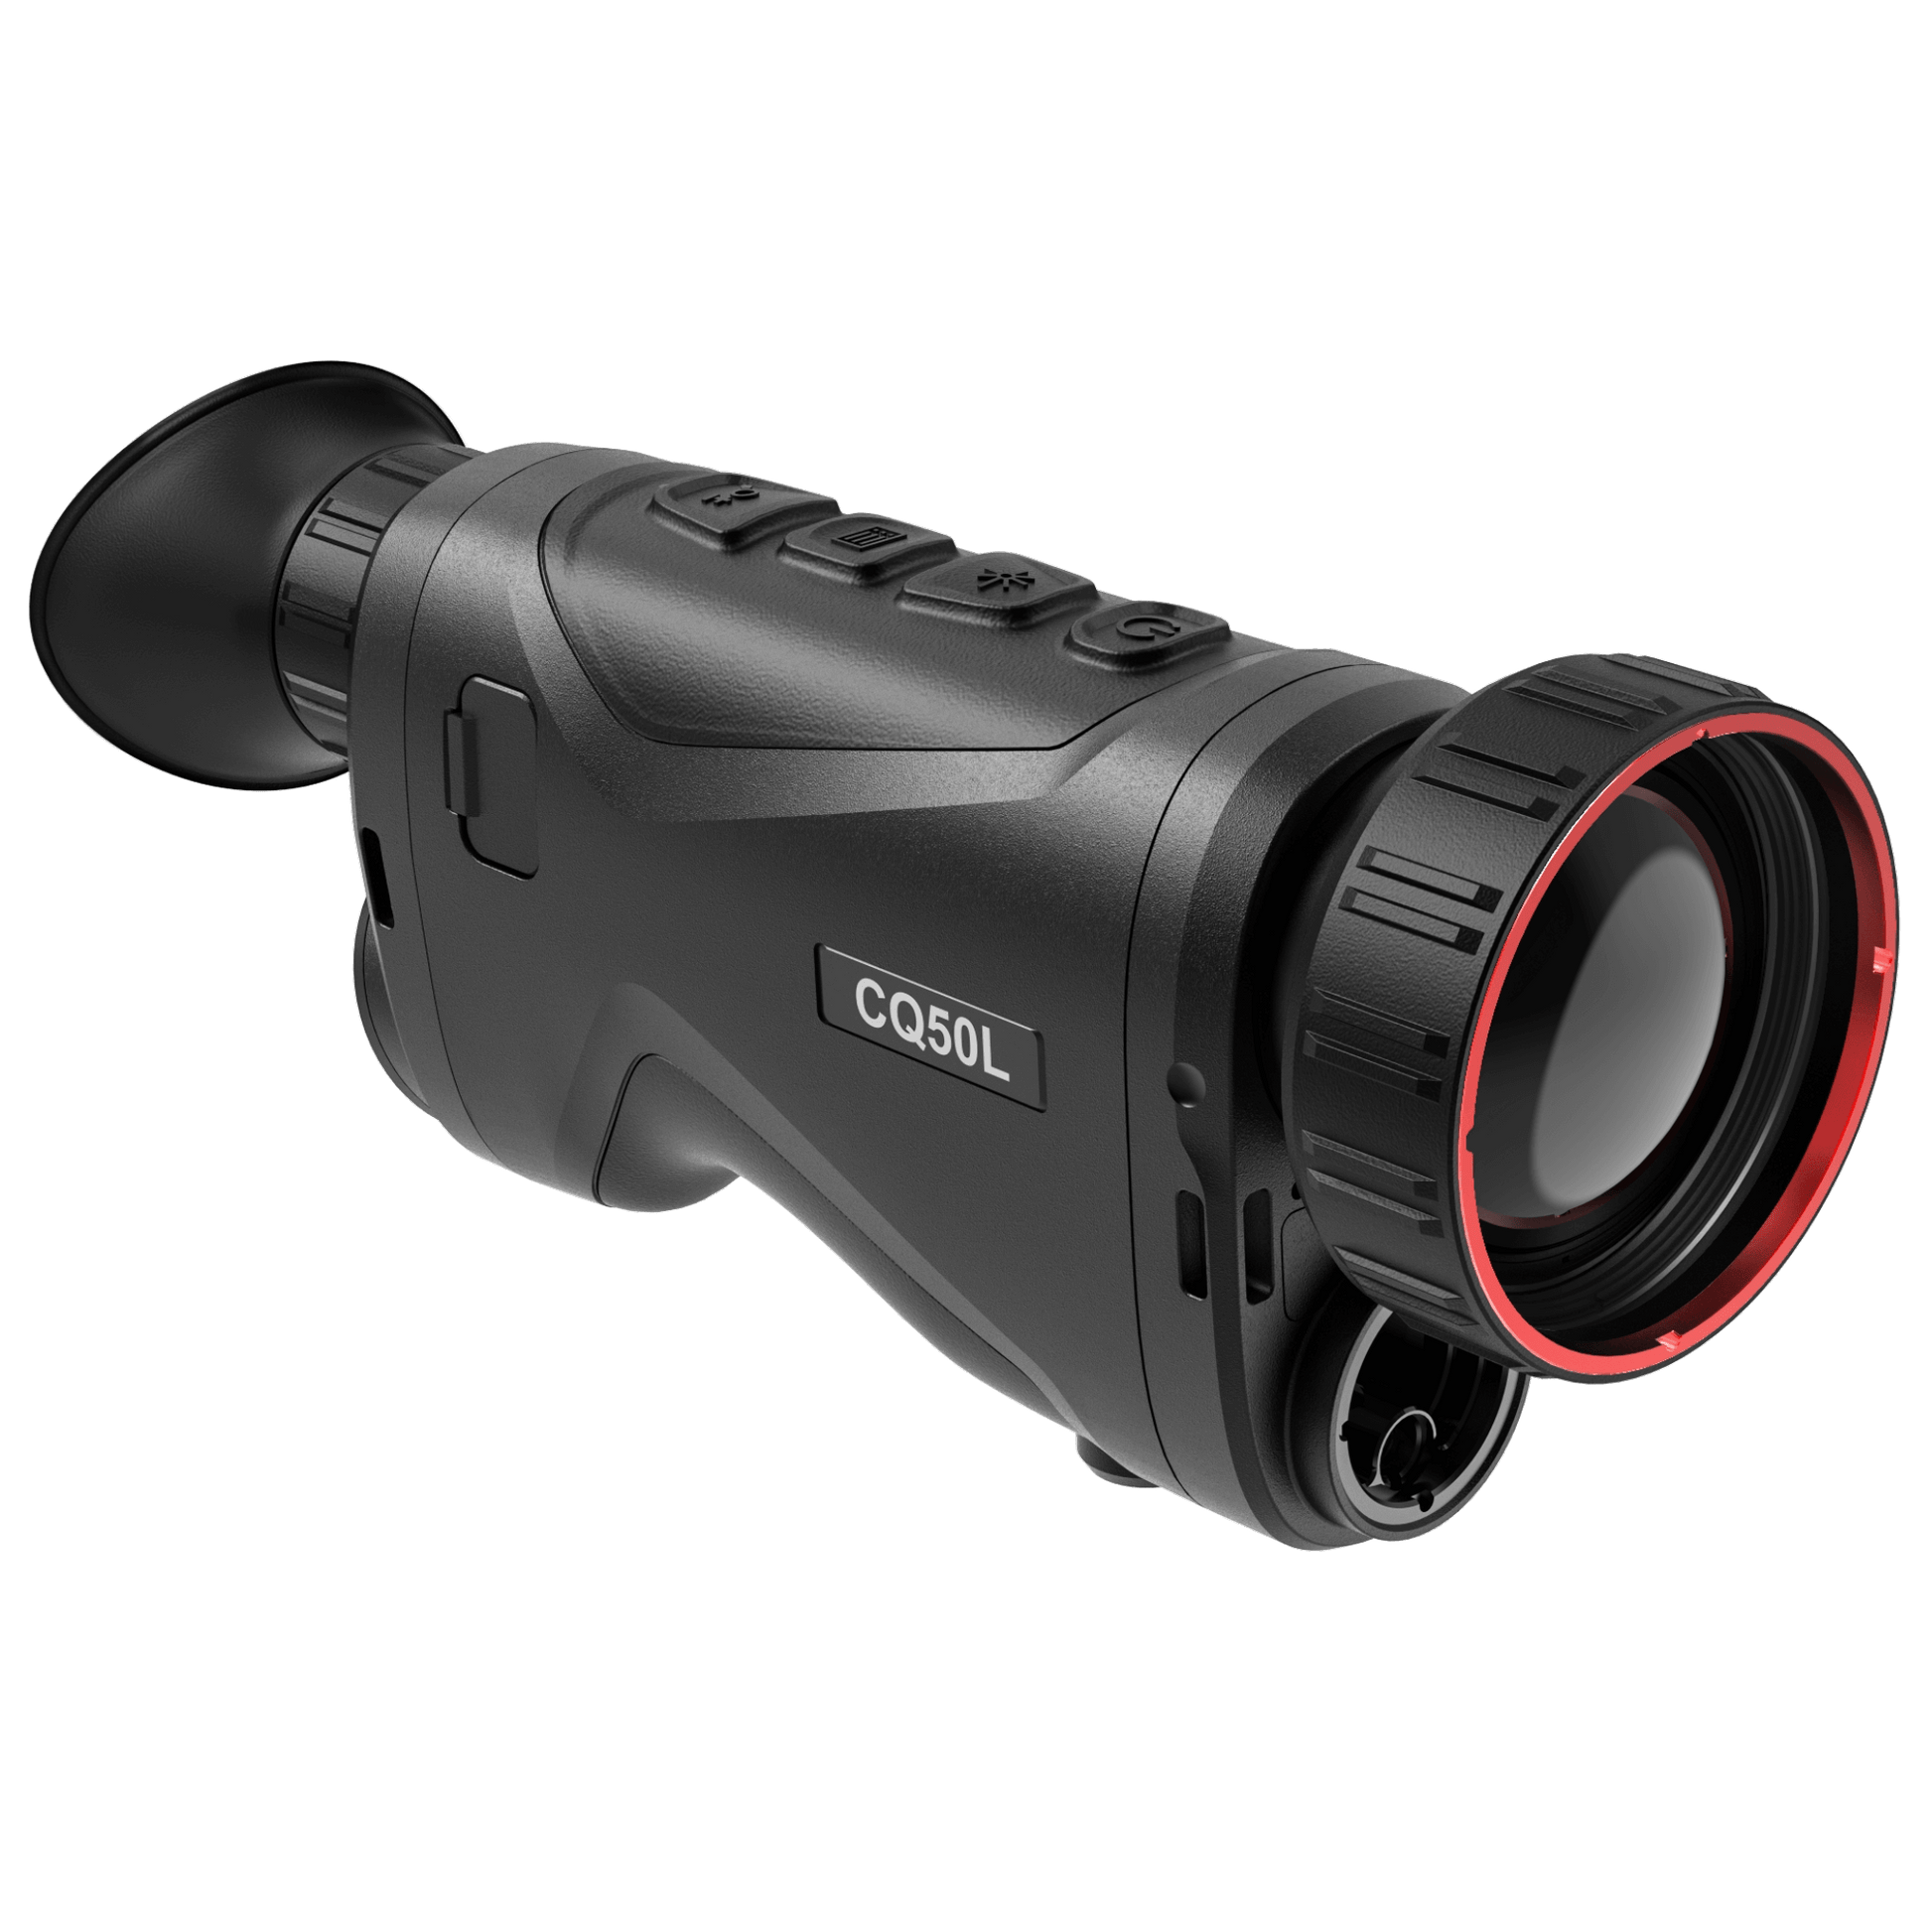 Front view of the HikMicro Condor CQ50L thermal monocular, showcasing its advanced rangefinder capabilities. This device is renowned as one of the best thermal monoculars with rangefinder for hunting, security, and surveillance applications.